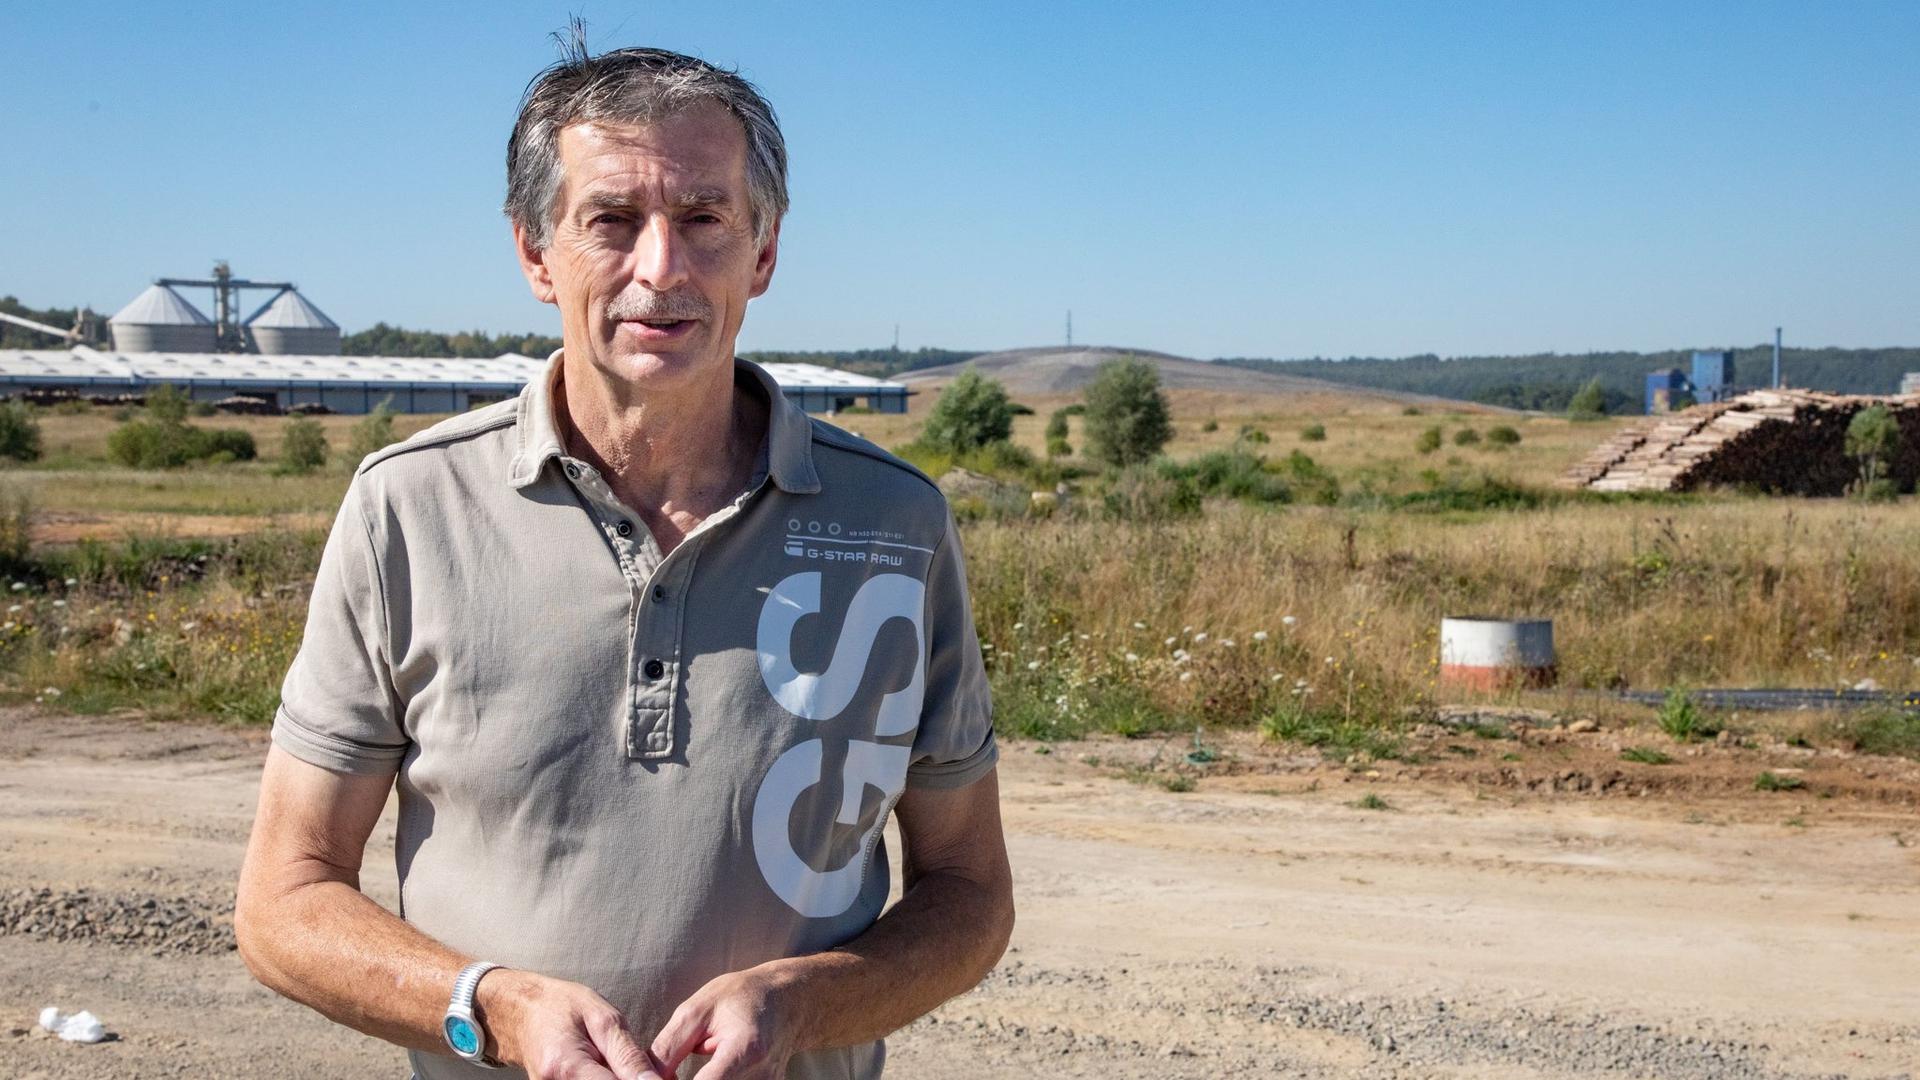 Differdange environmentalist Daniel Schmit on a tour of the sprawling waste zone in southern Luxembourg where questions linger about pollution risks. PHOTO: Guy Jallay